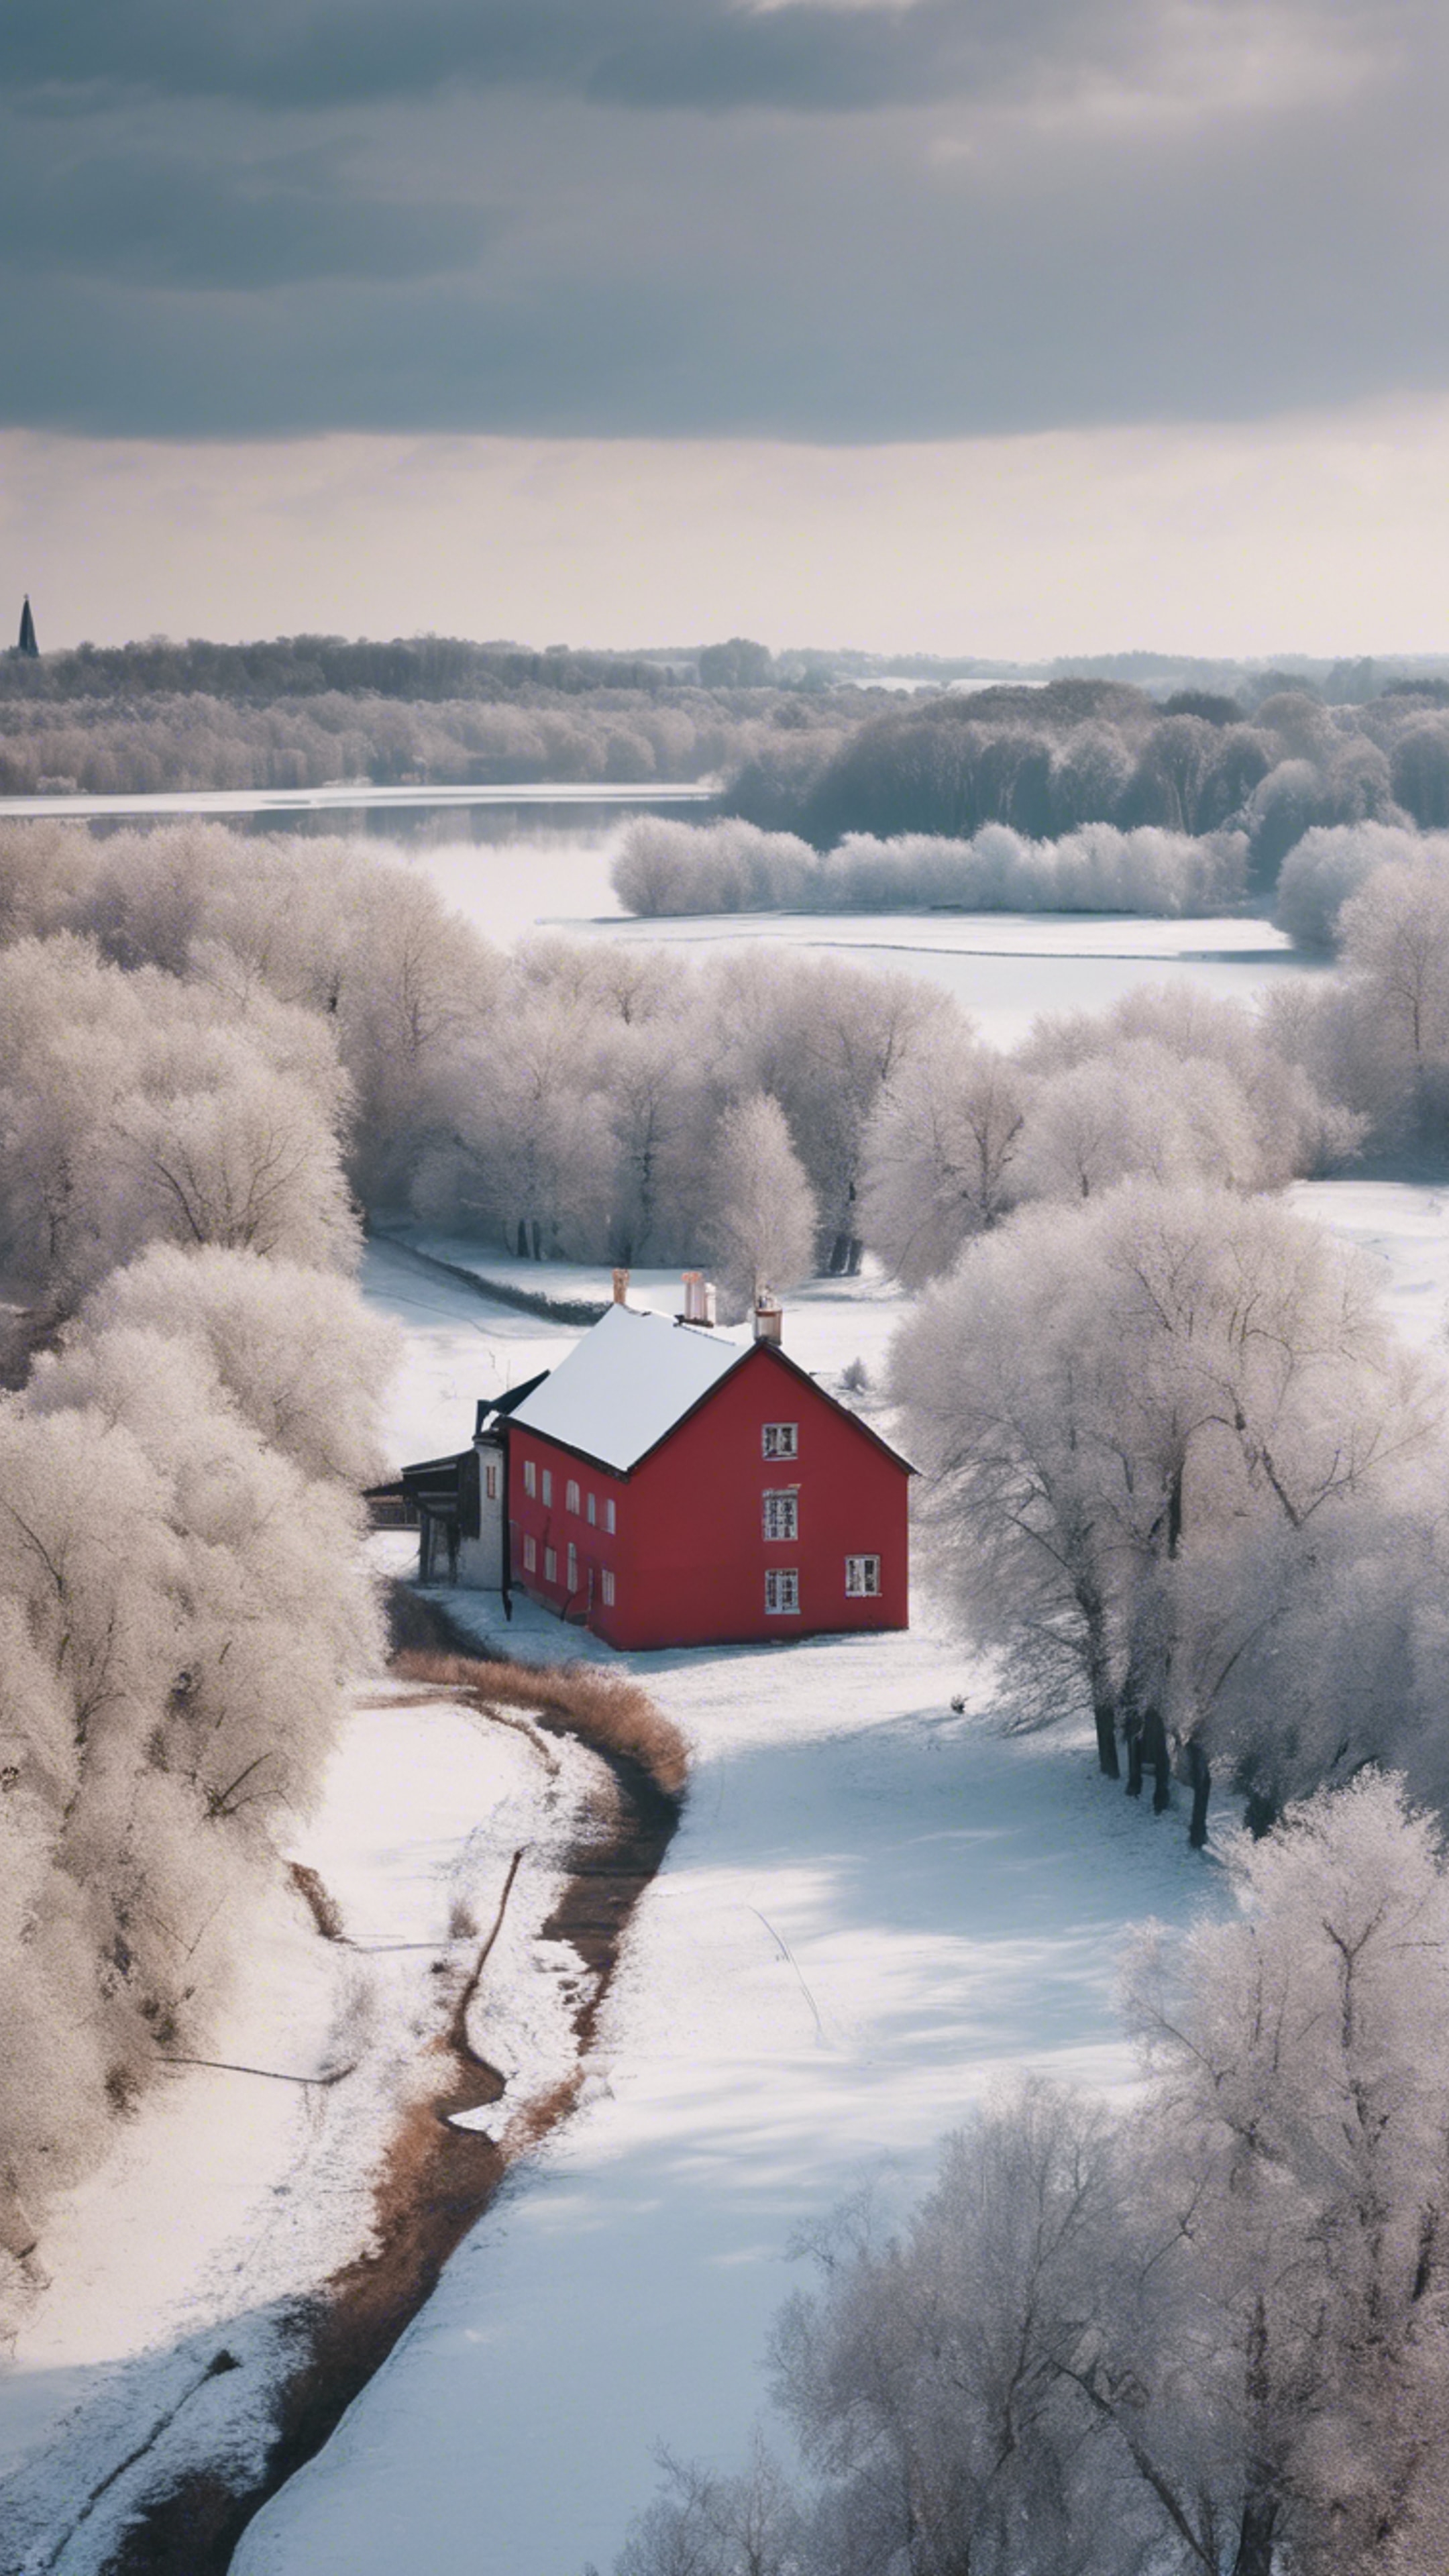 A snow-covered French country landscape with bare trees, a frozen river, and a small red-roofed house in the distance.壁紙[86a496d4055745a5962e]